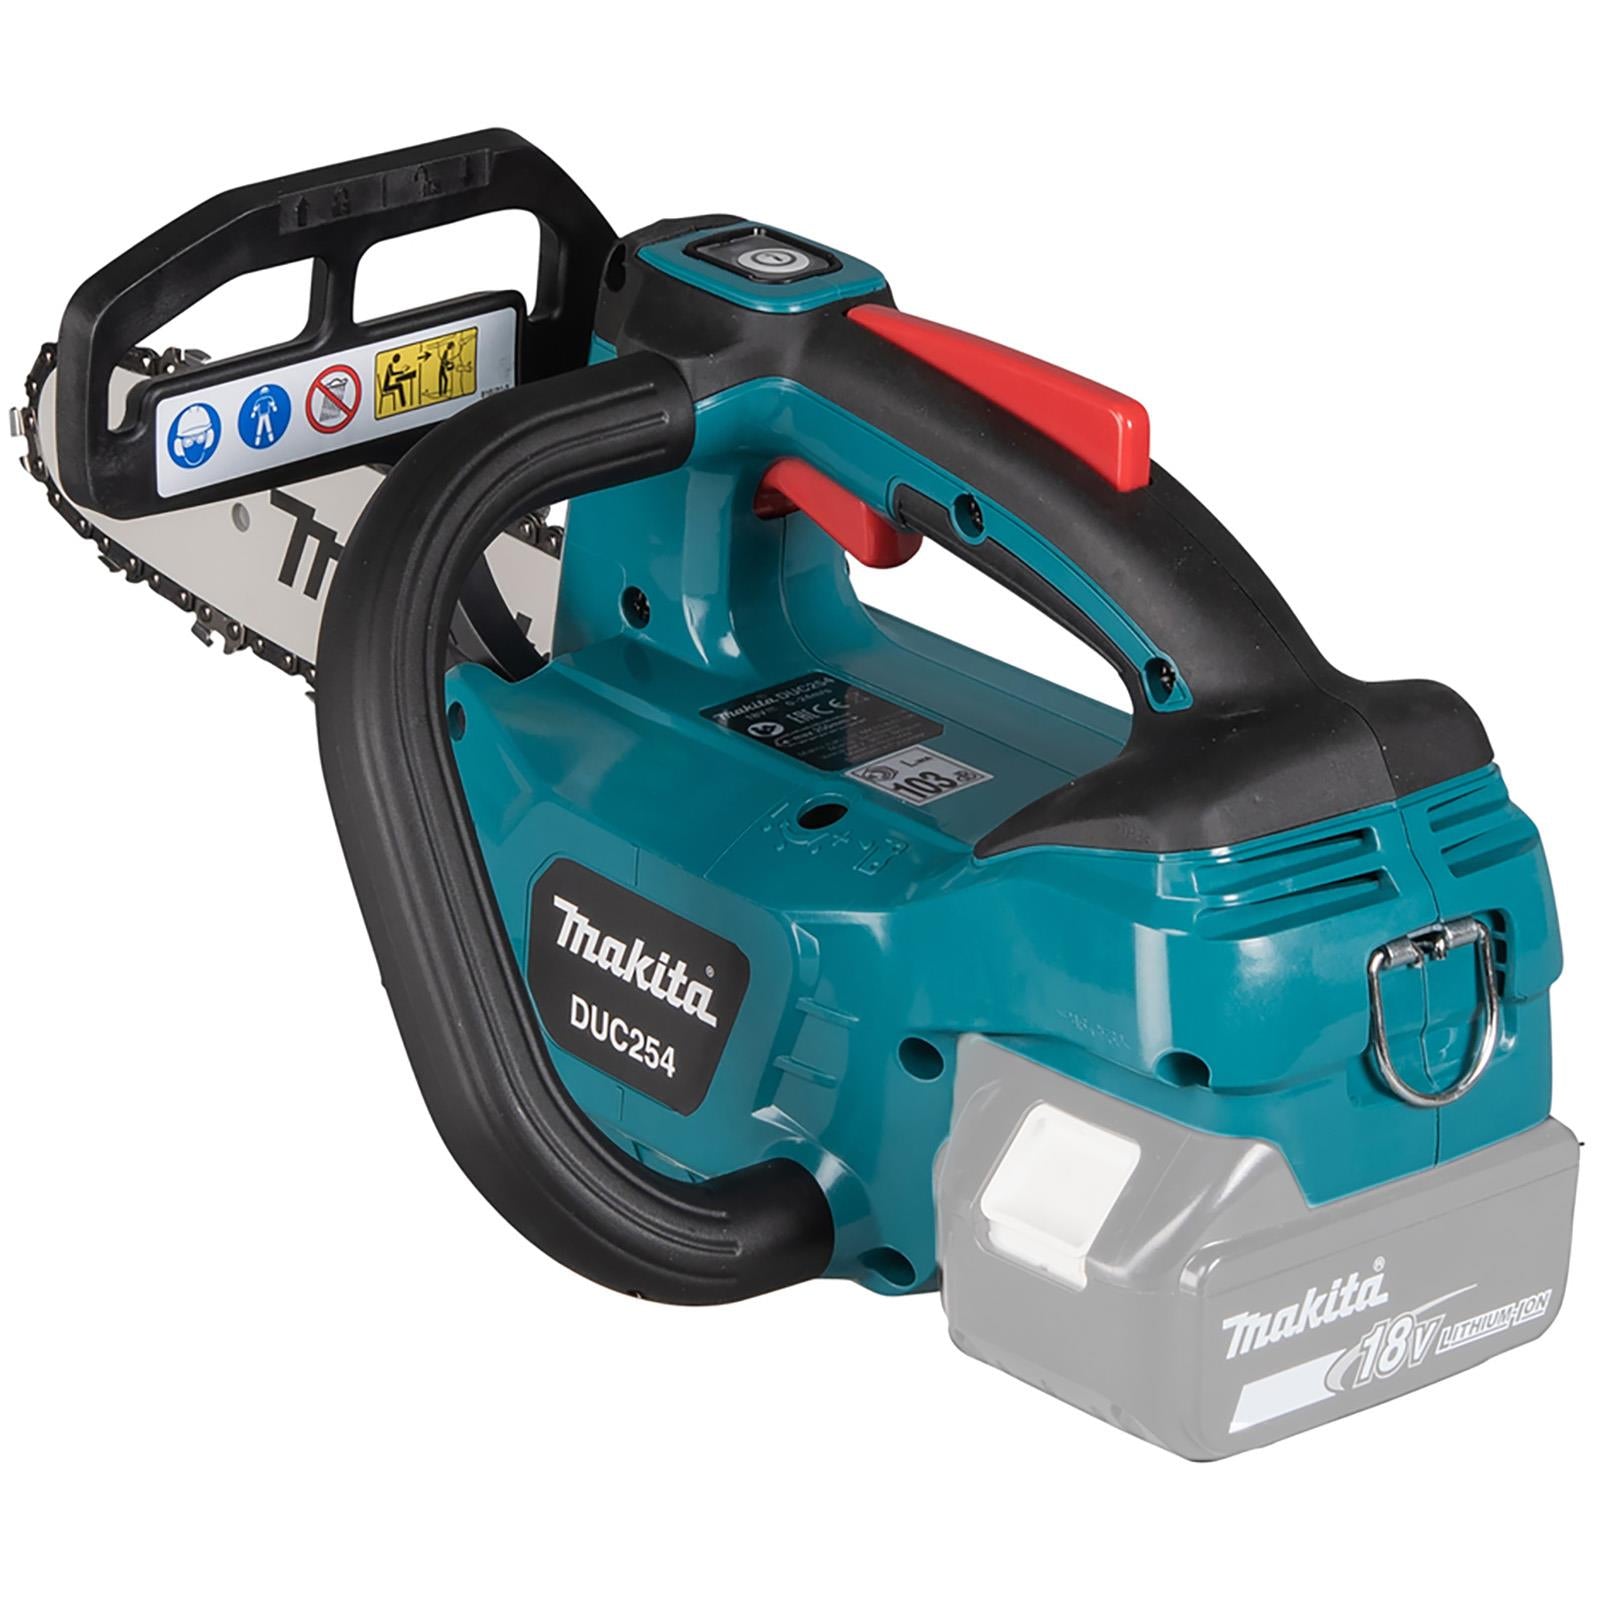 Makita Chainsaw 25cm 10" 18V LXT Brushless Cordless Top Handle Garden Tree Cutting Pruning Bare Unit Body Only DUC254Z